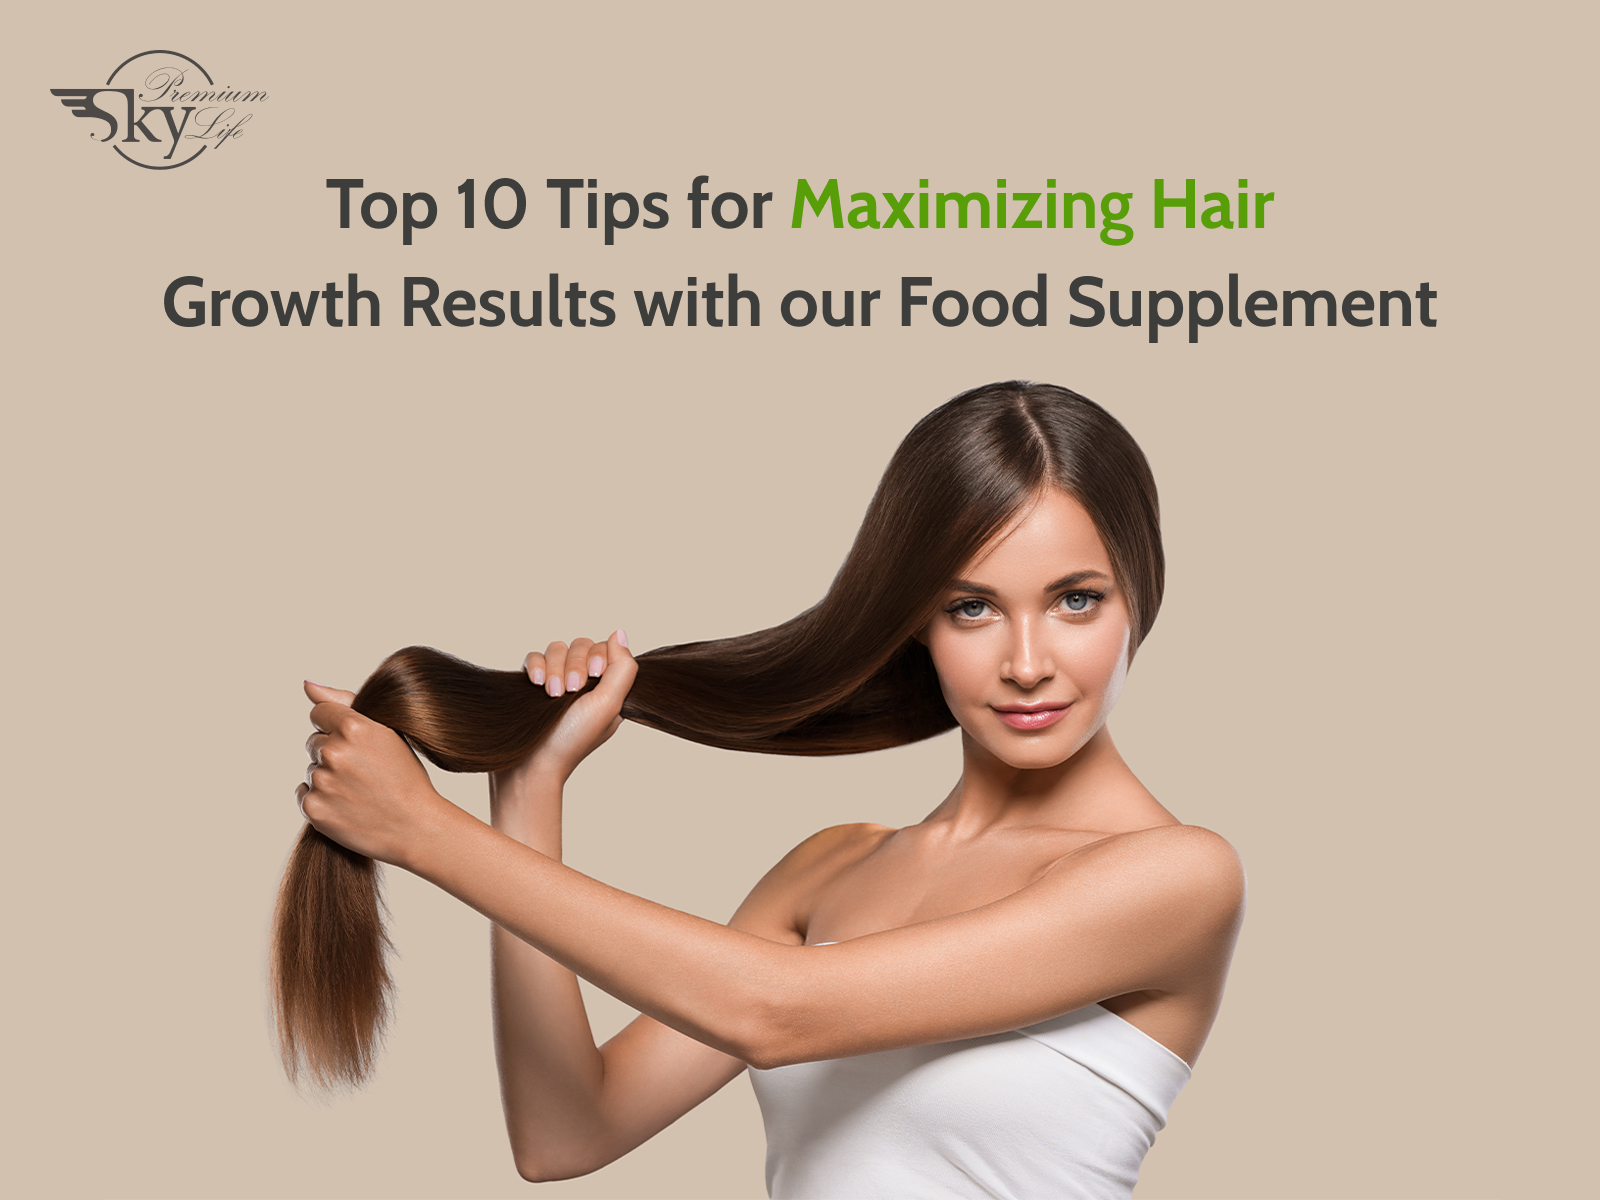 Top 10 Tips for Maximizing Hair Growth Results with our Food Supplement